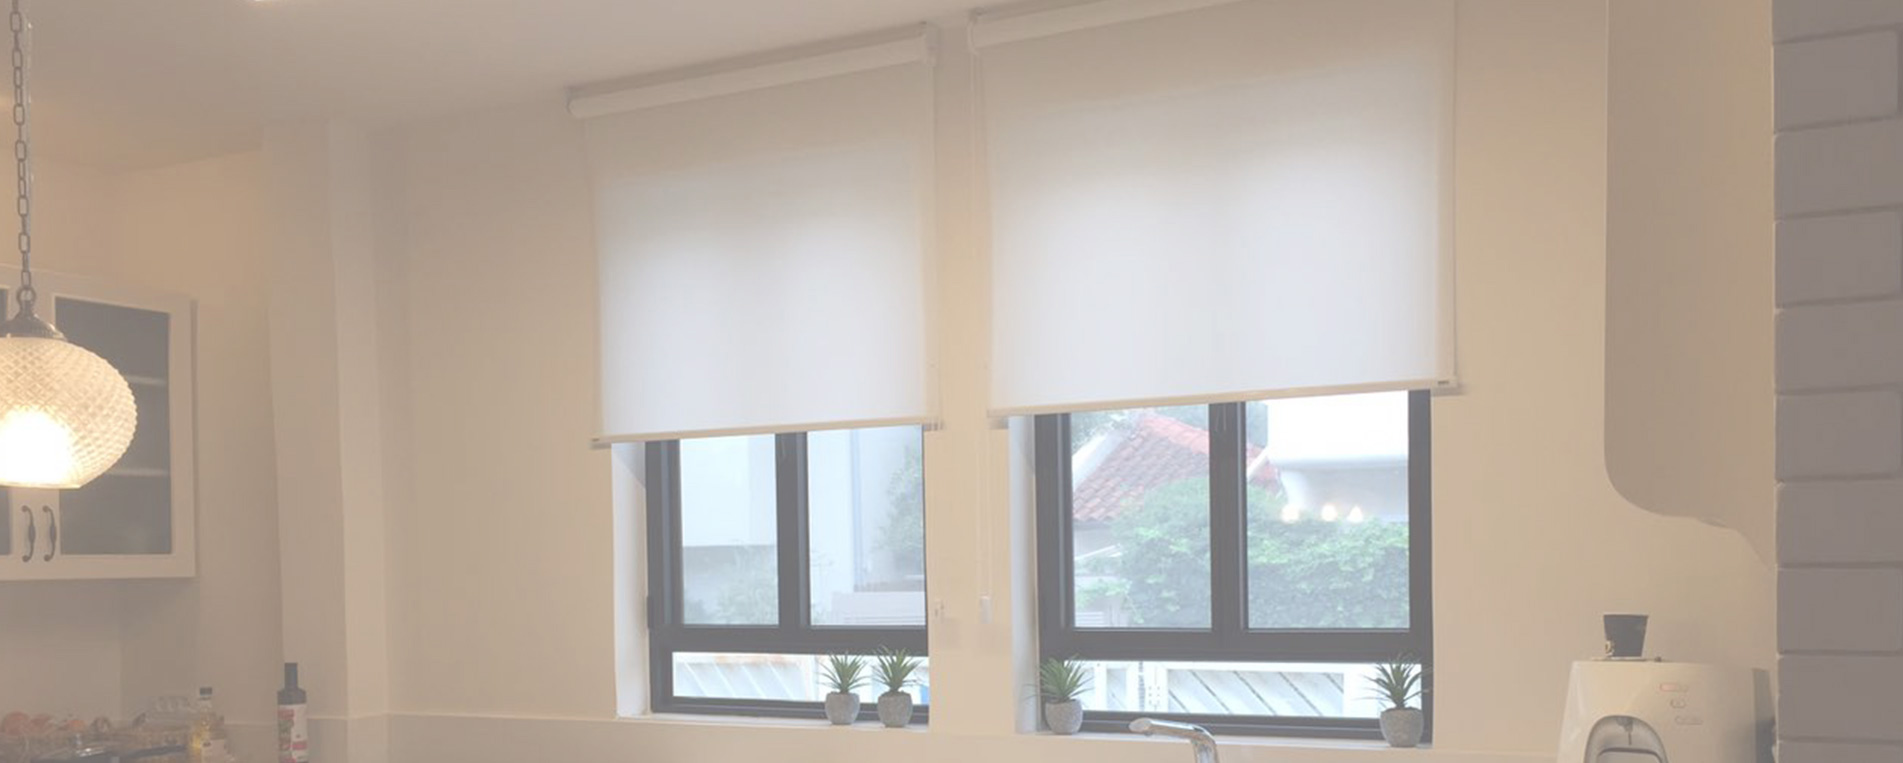 New Vertical Blinds For Office Windows, Culver City